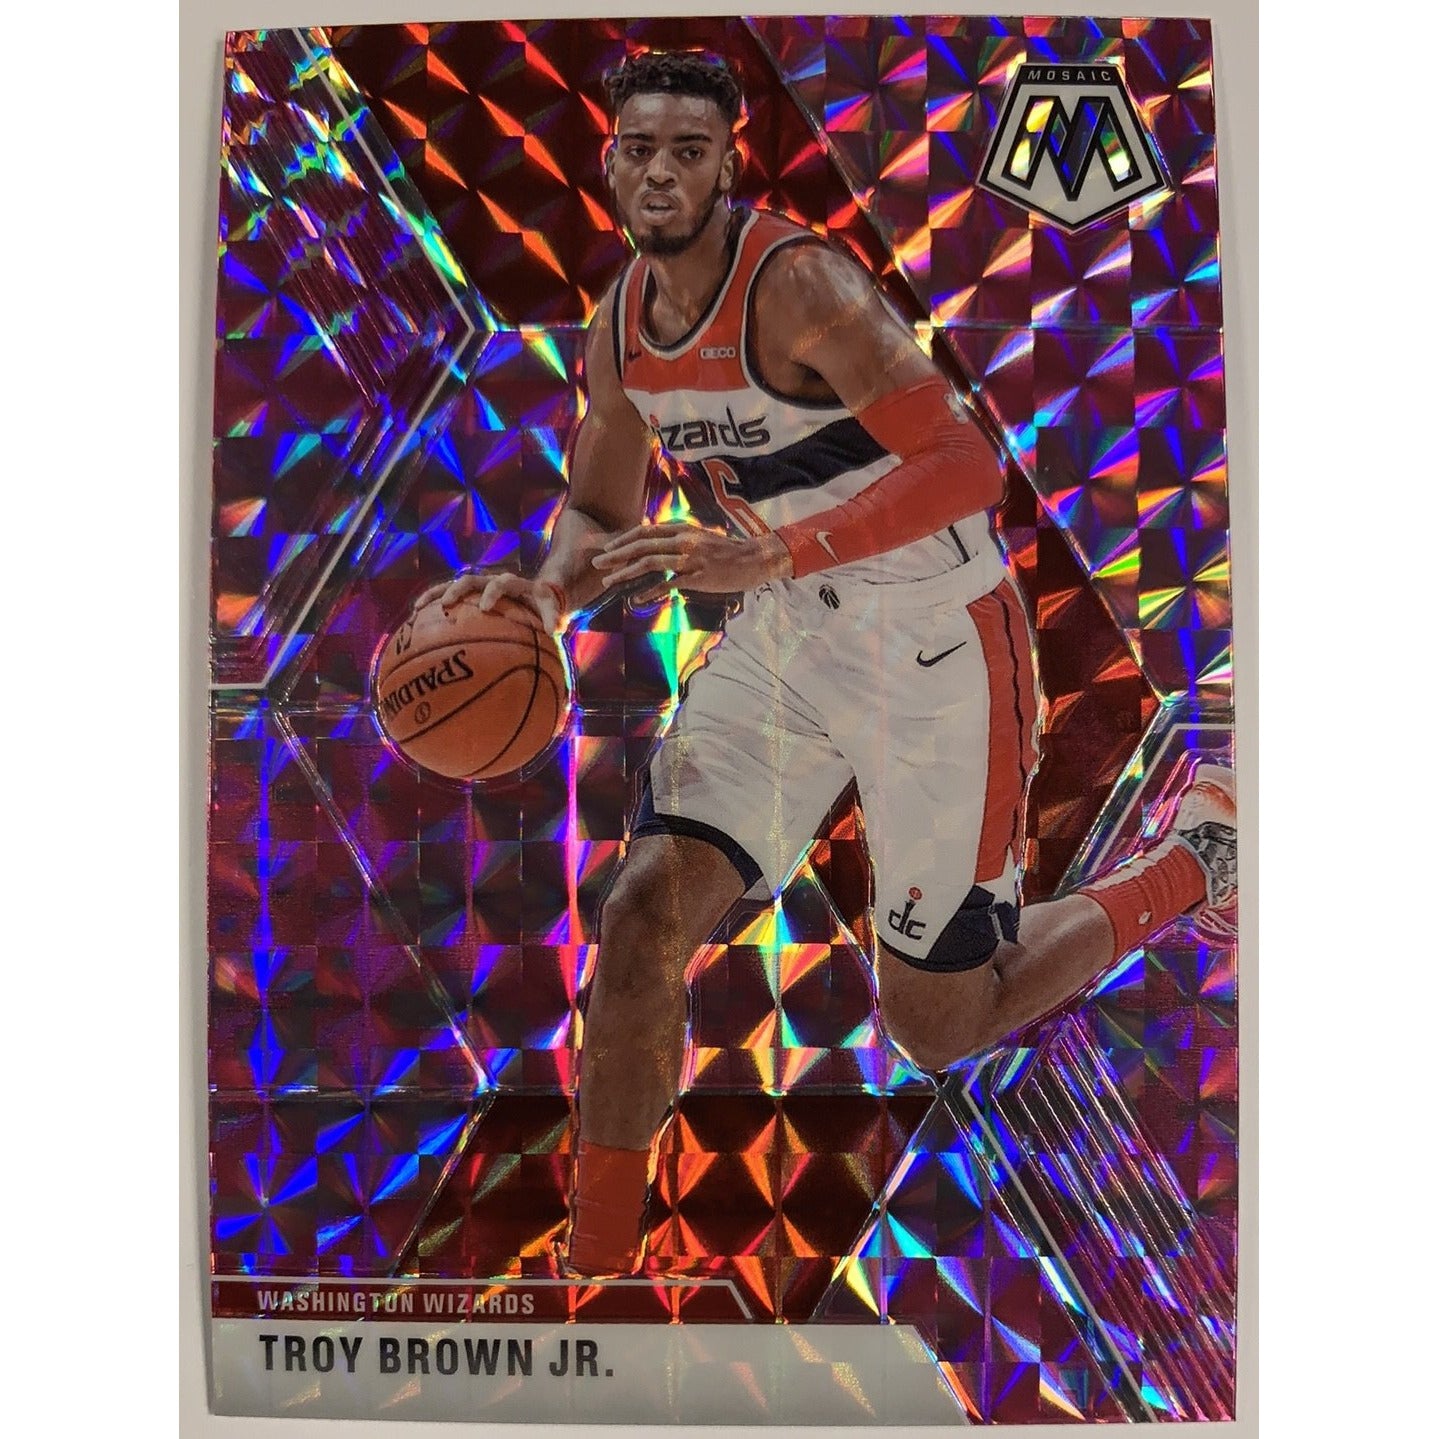  2019-20 Mosaic Troy Brown Jr Pink Prizm  Local Legends Cards & Collectibles